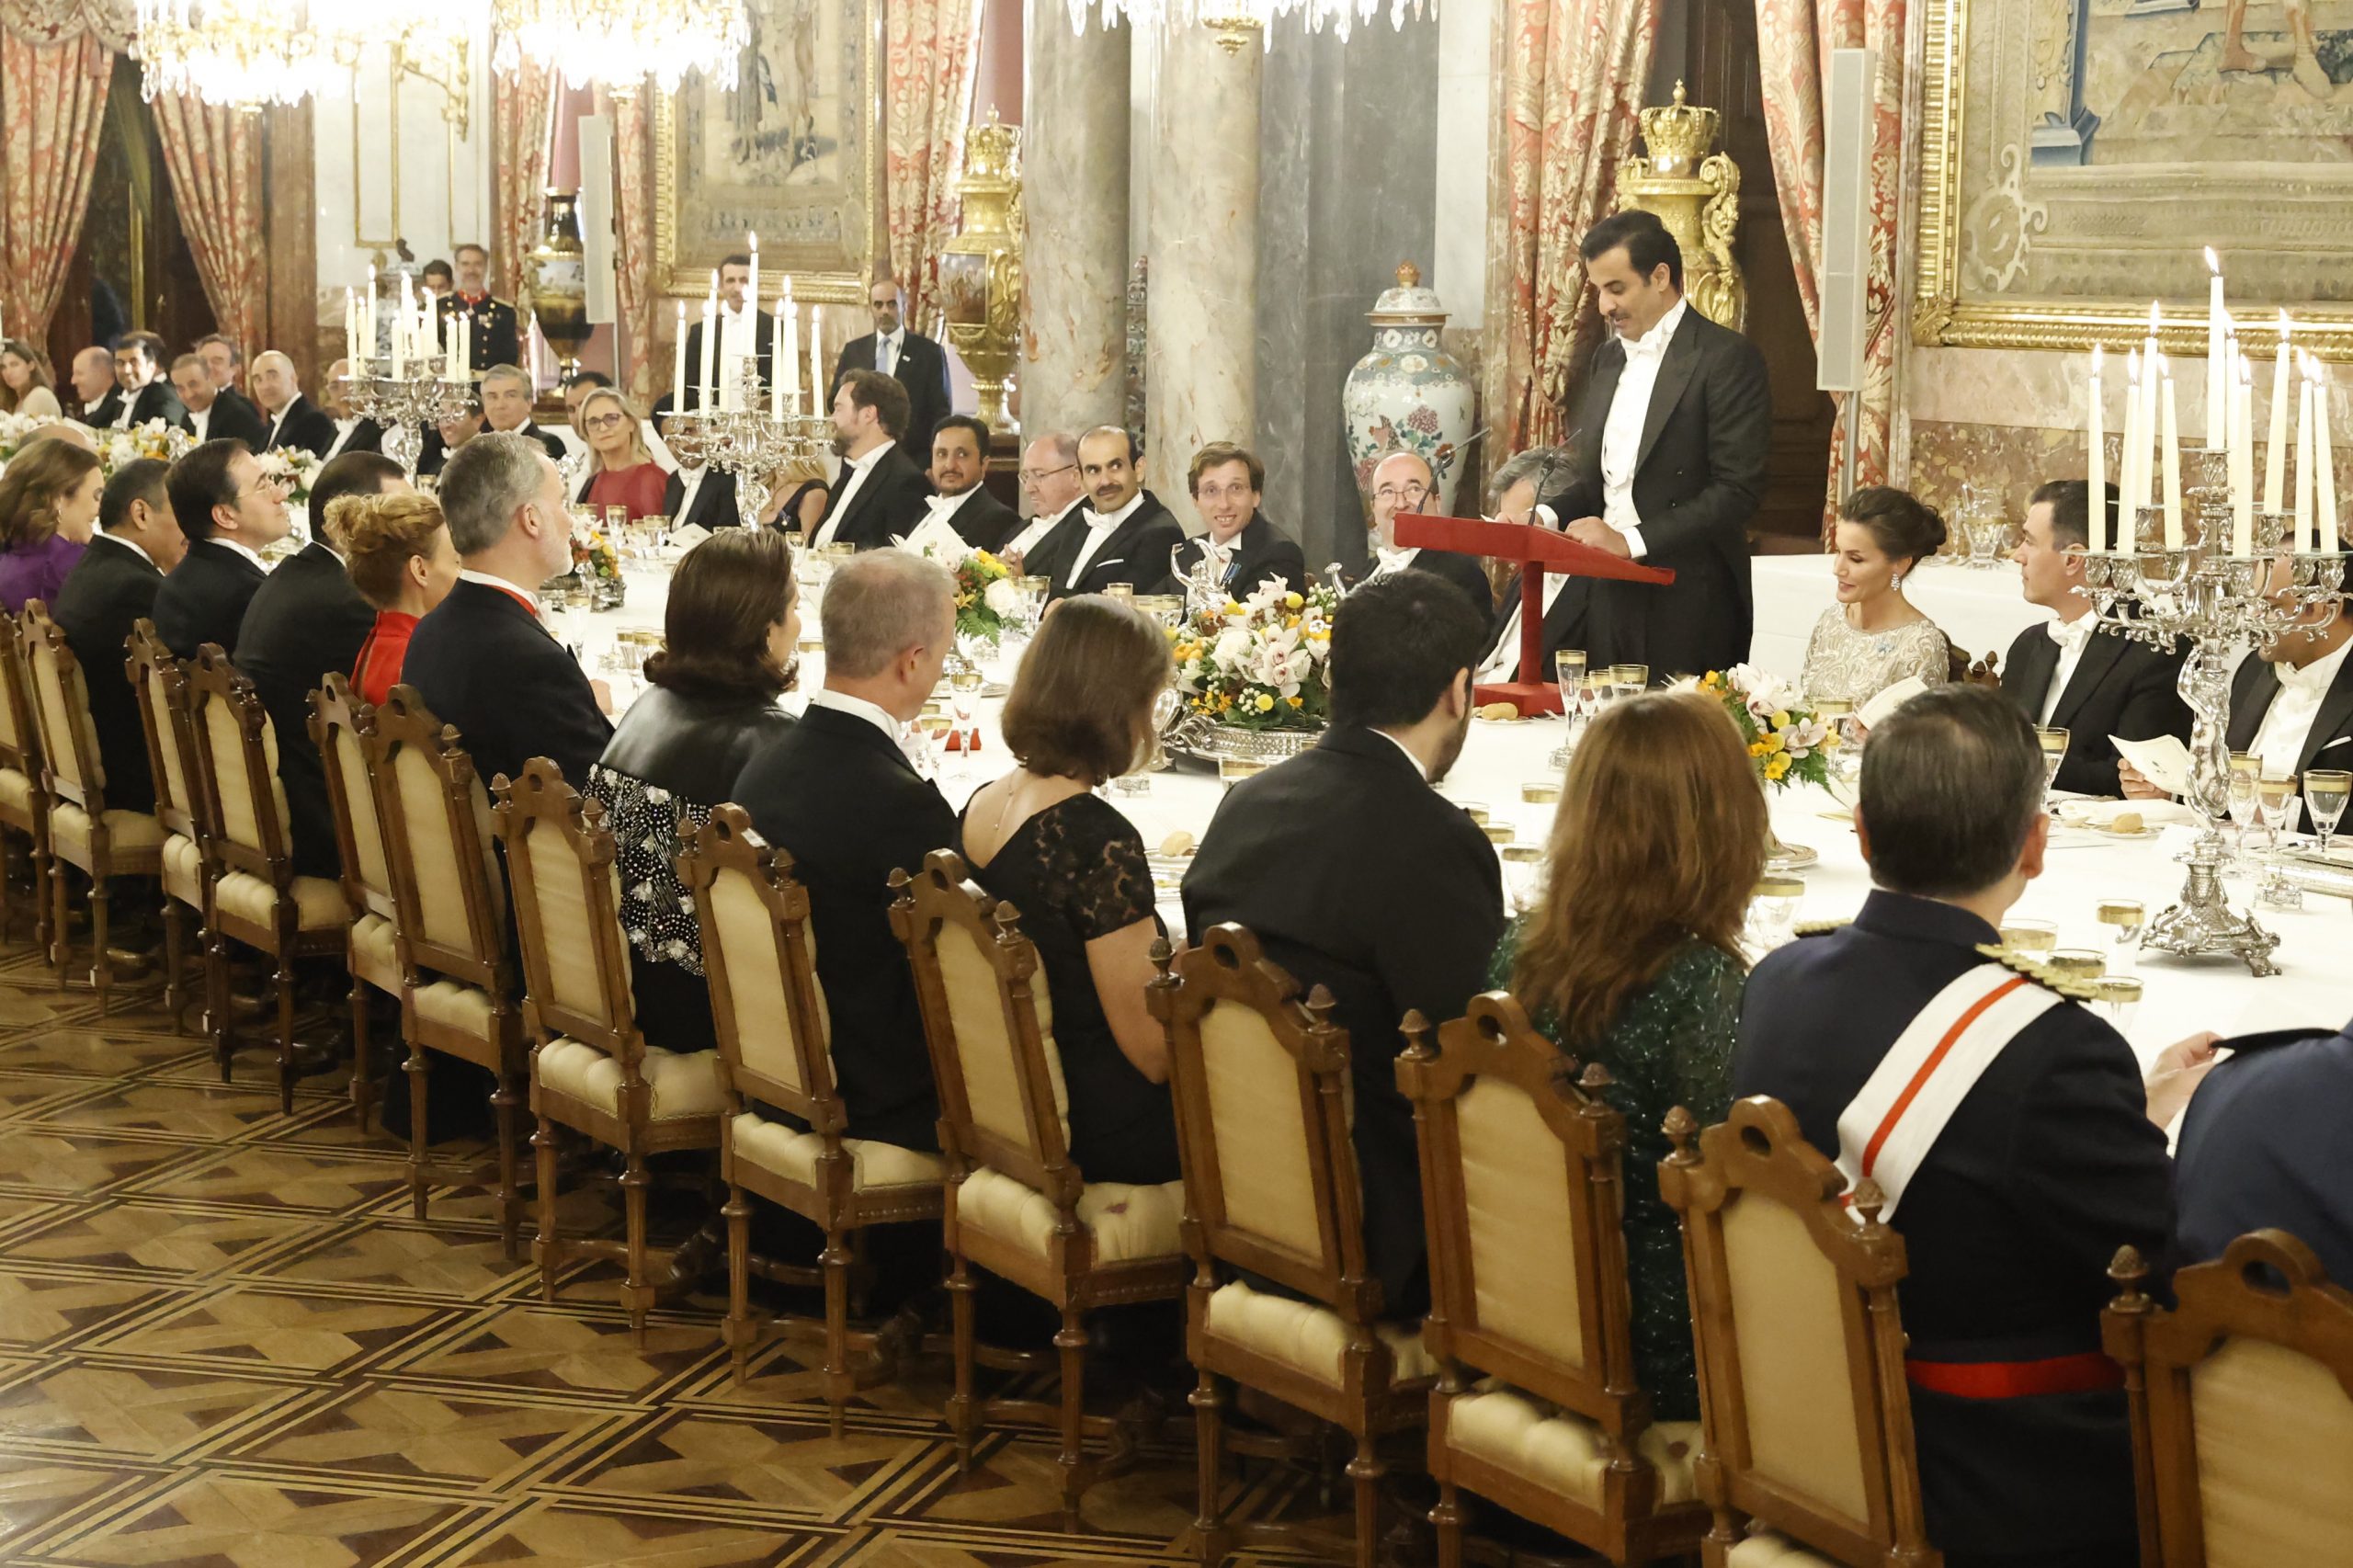 HH the Amir, HH Sheikha Jawaher Attend State Dinner Banquet Hosted by King and Queen of Spain